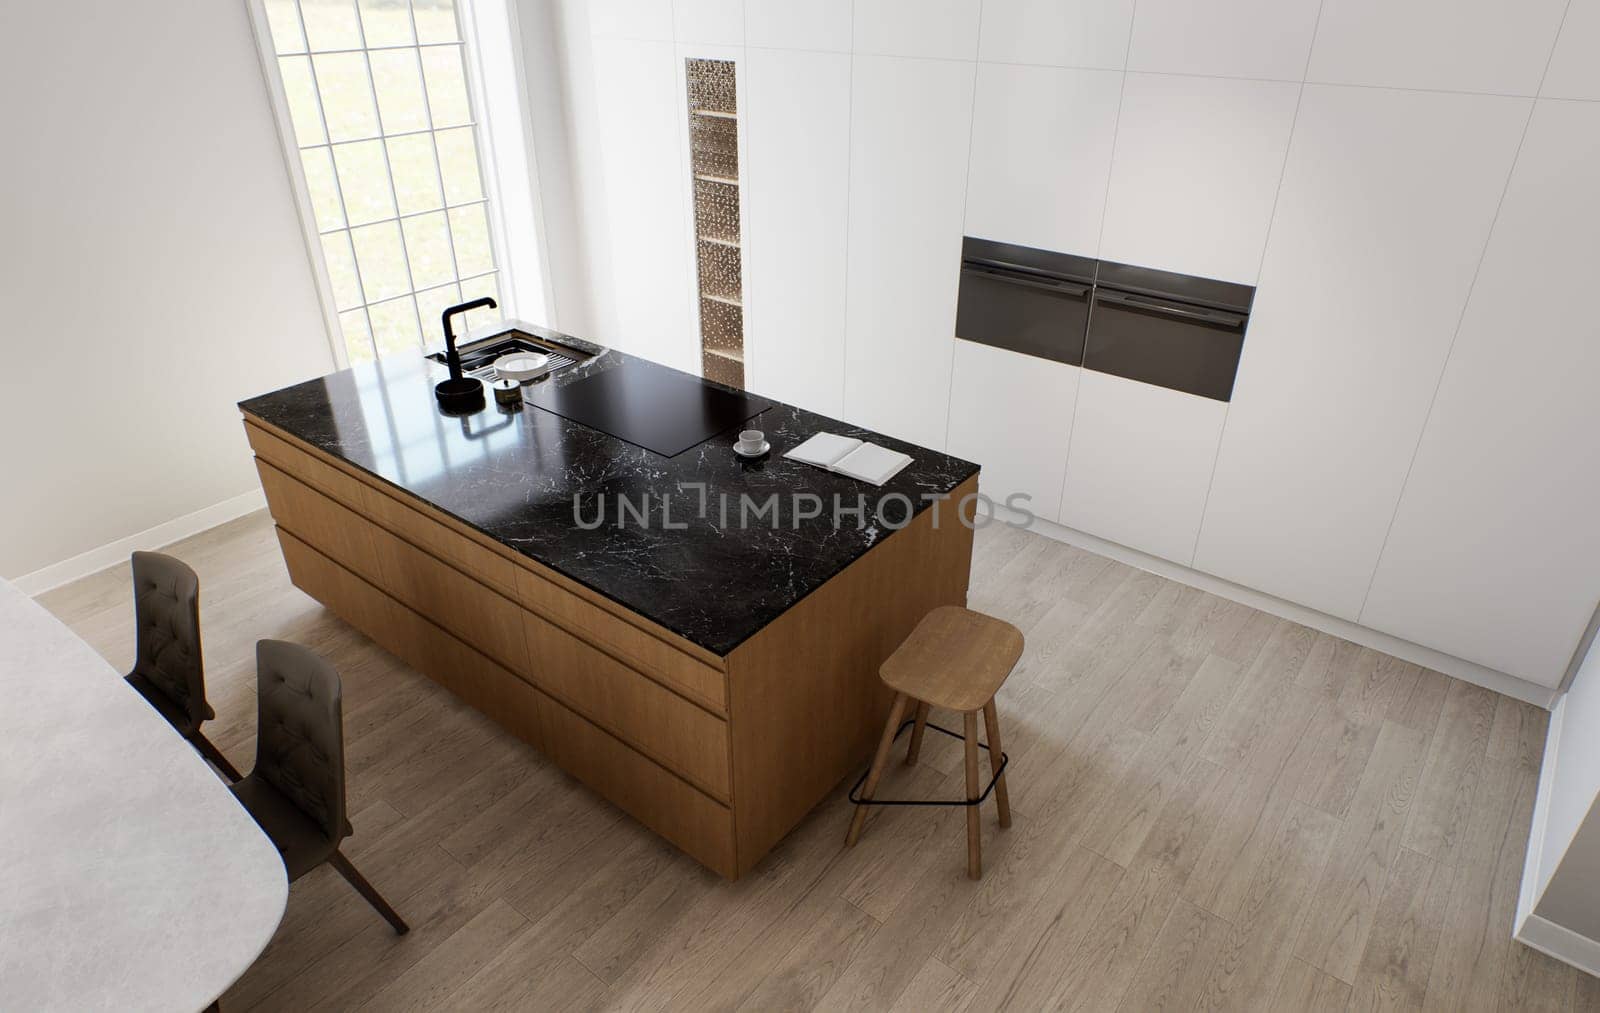 The interior of a light minimalist kitchen-studio with a wooden island. Kitchen with bar stool and black marble top with large window and appliances. Black faucet and stove on the island. 3D rendering